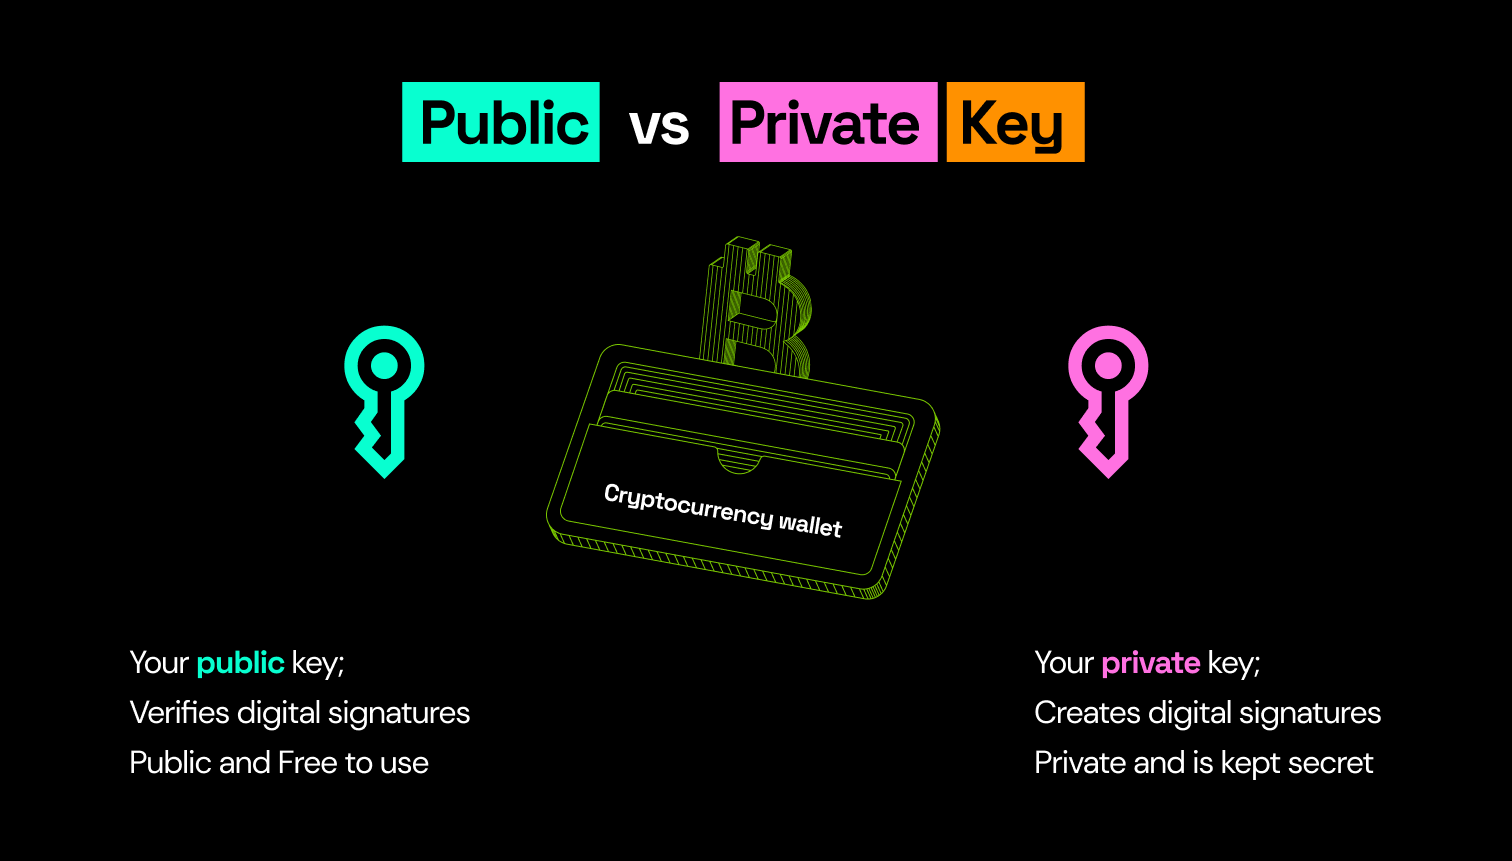 Public and private keys